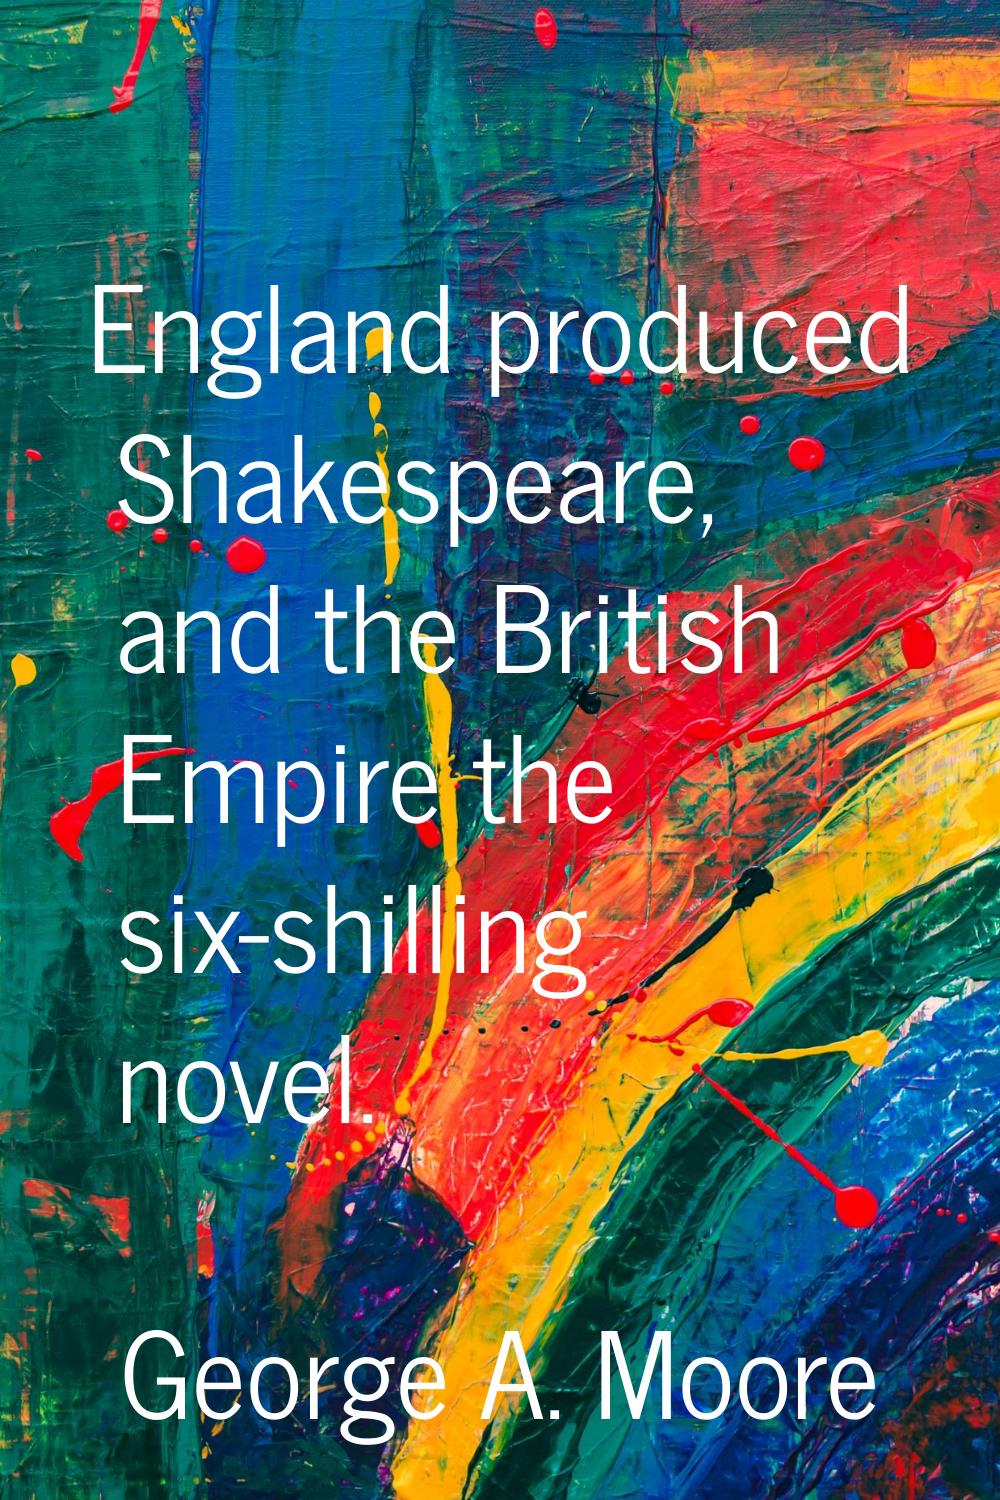 England produced Shakespeare, and the British Empire the six-shilling novel.